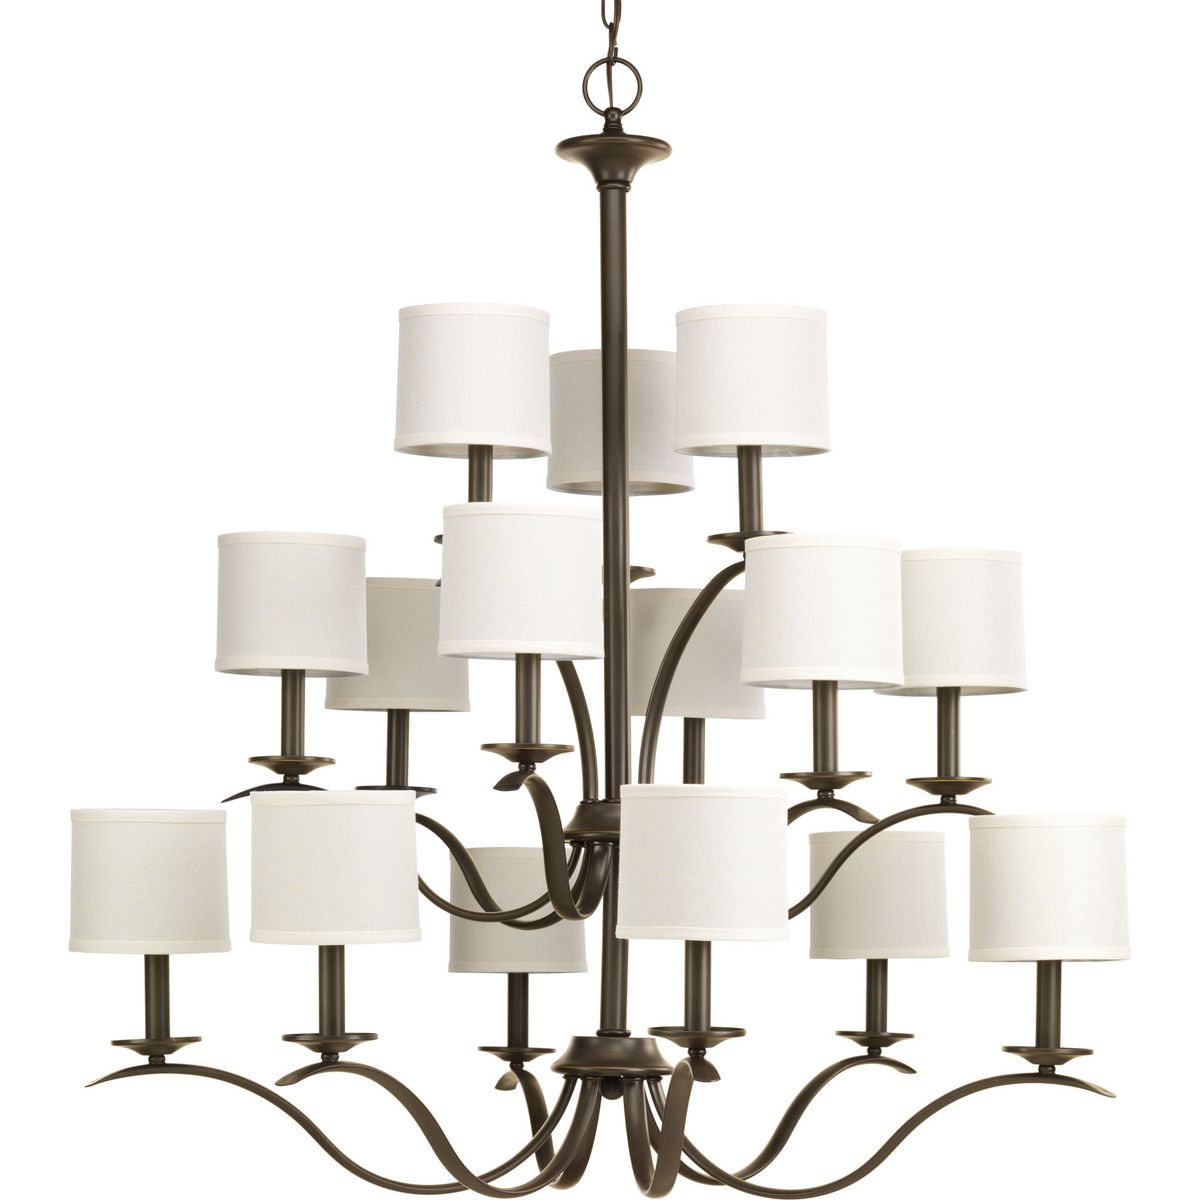 Progress Lighting P5065-20 Transitional One Mini Pendant from Inspire Collection in Pewter Antique Bronze Silver Finish Lighting Accessory Nickel 